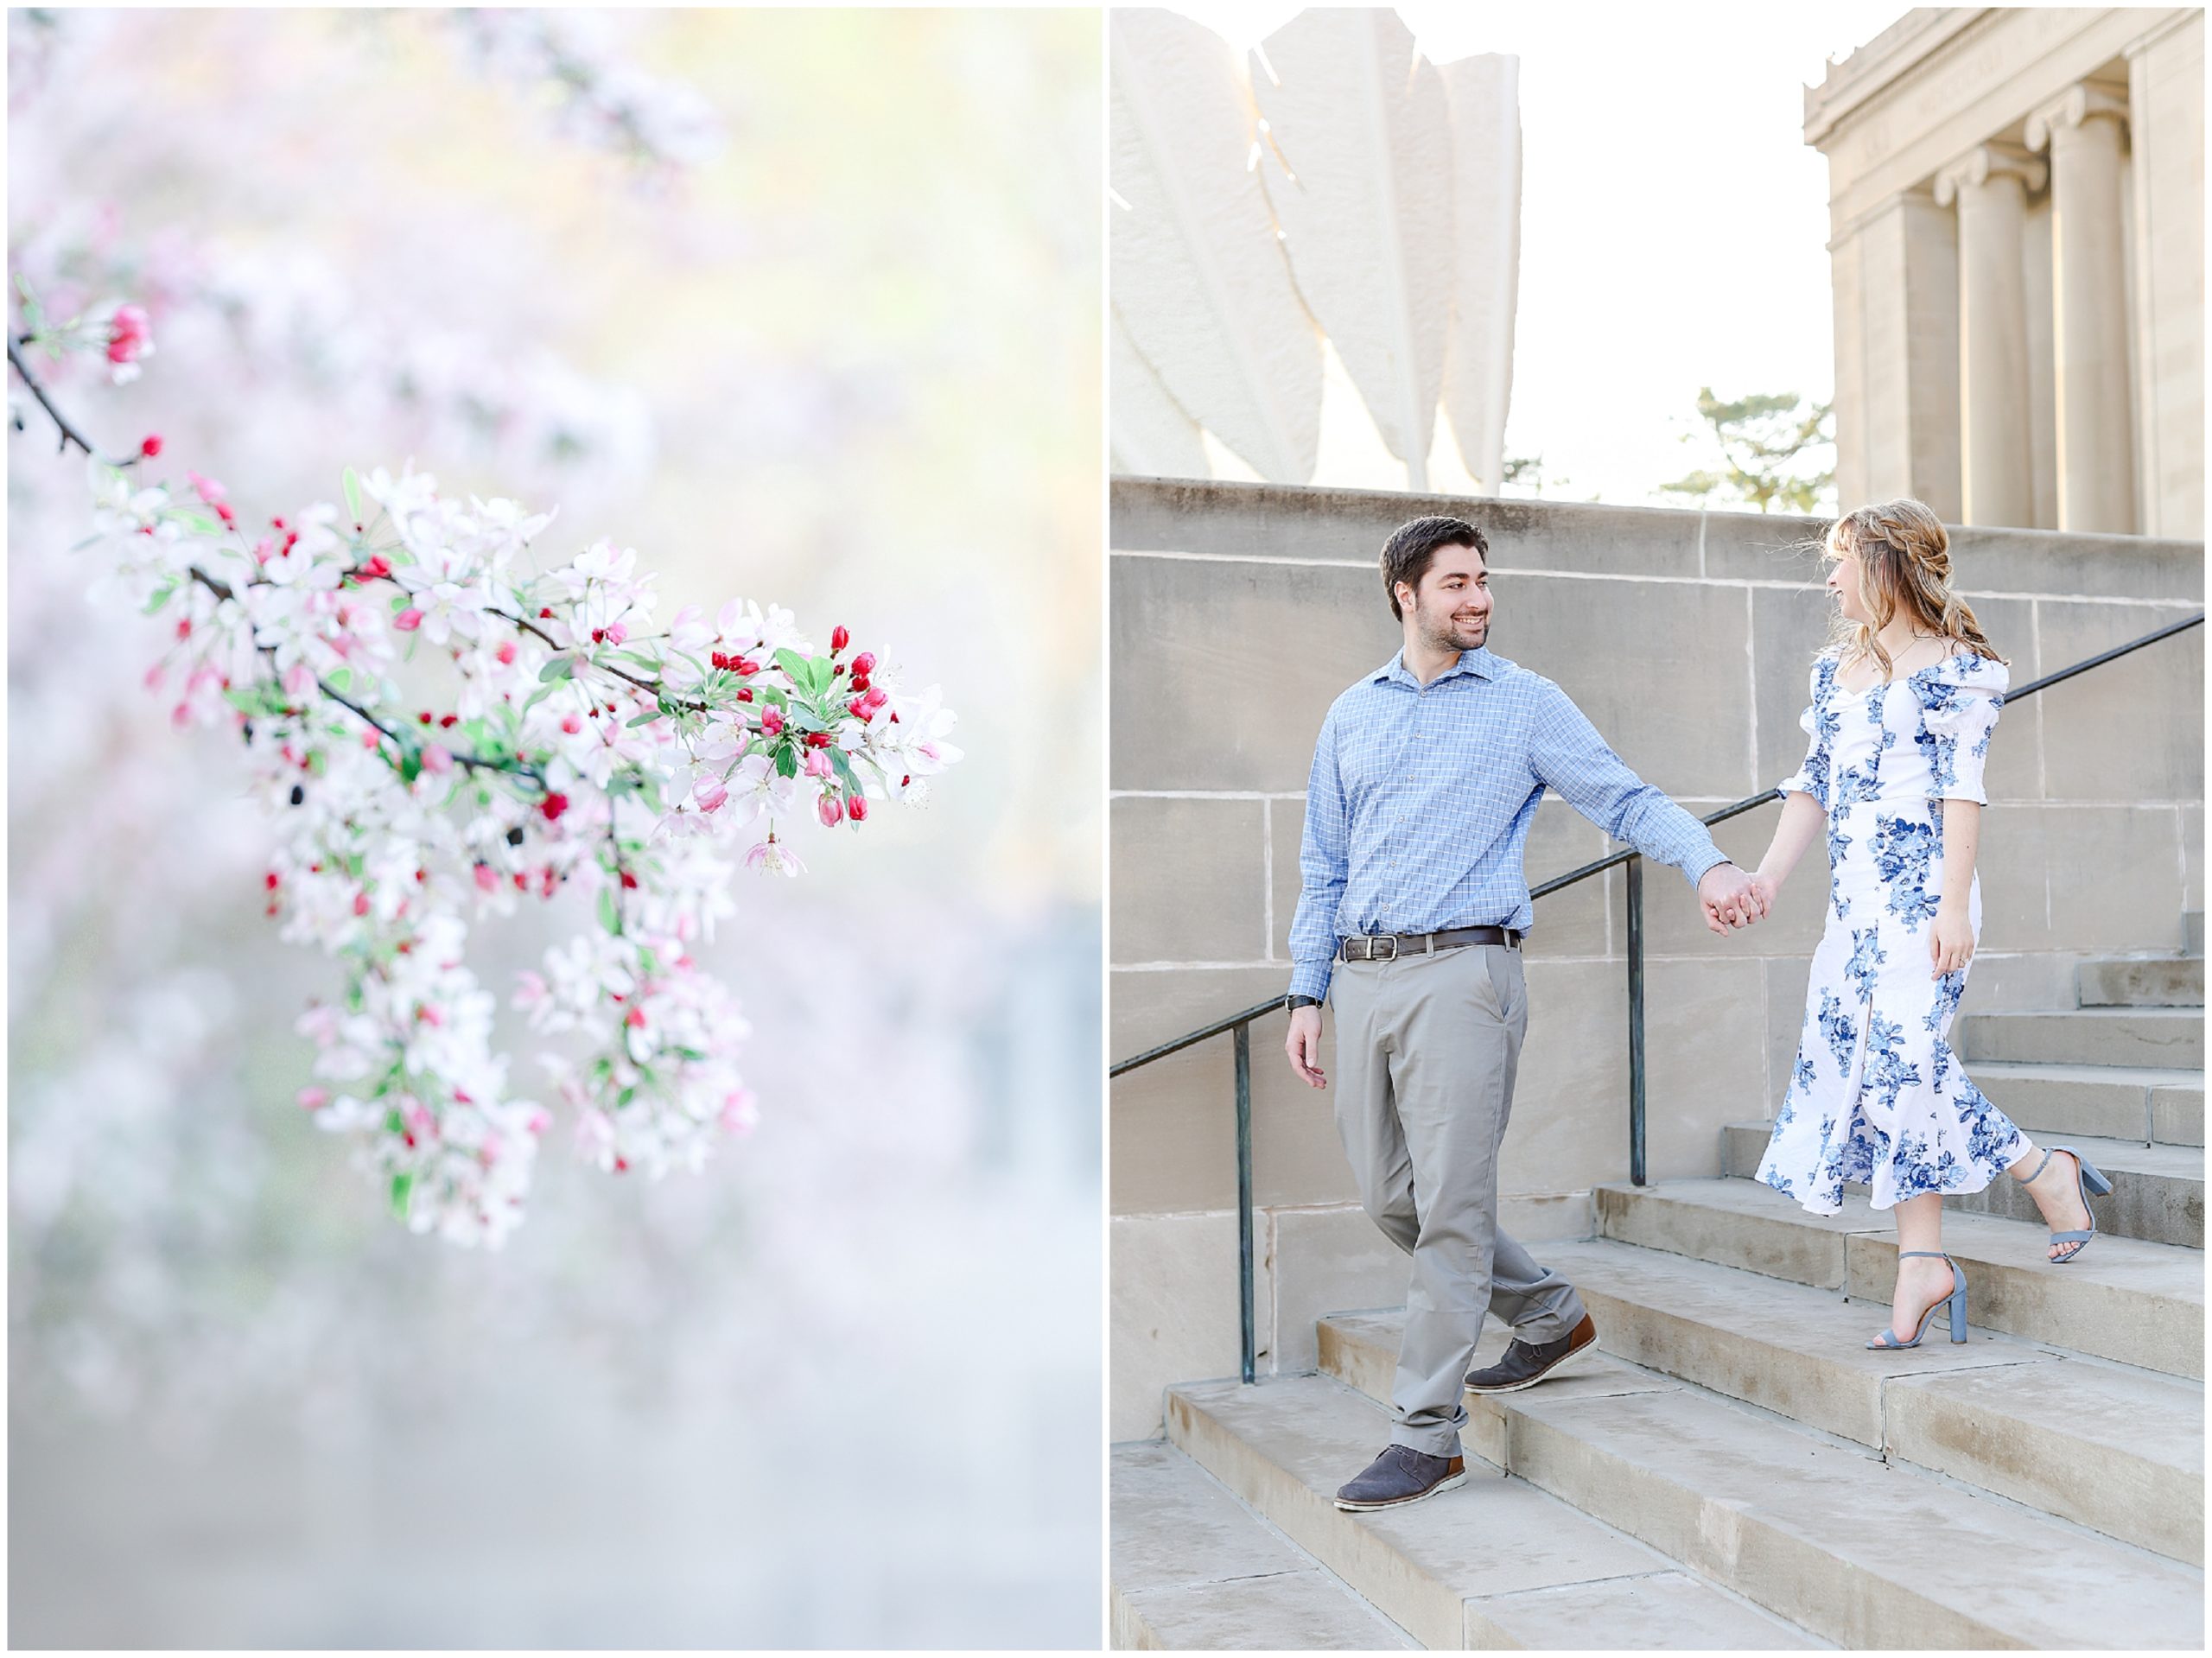 Look at what they wore for their engagement photos! Spring Engagement Photos with Ali & Connor at the Nelson Atkins Museum in Kansas City by best wedding photographer Mariam Saifan Photography - Engagement and Wedding Style Guide - What to Wear and Where to Take Your Photos in Kansas City - walking down the stairs 